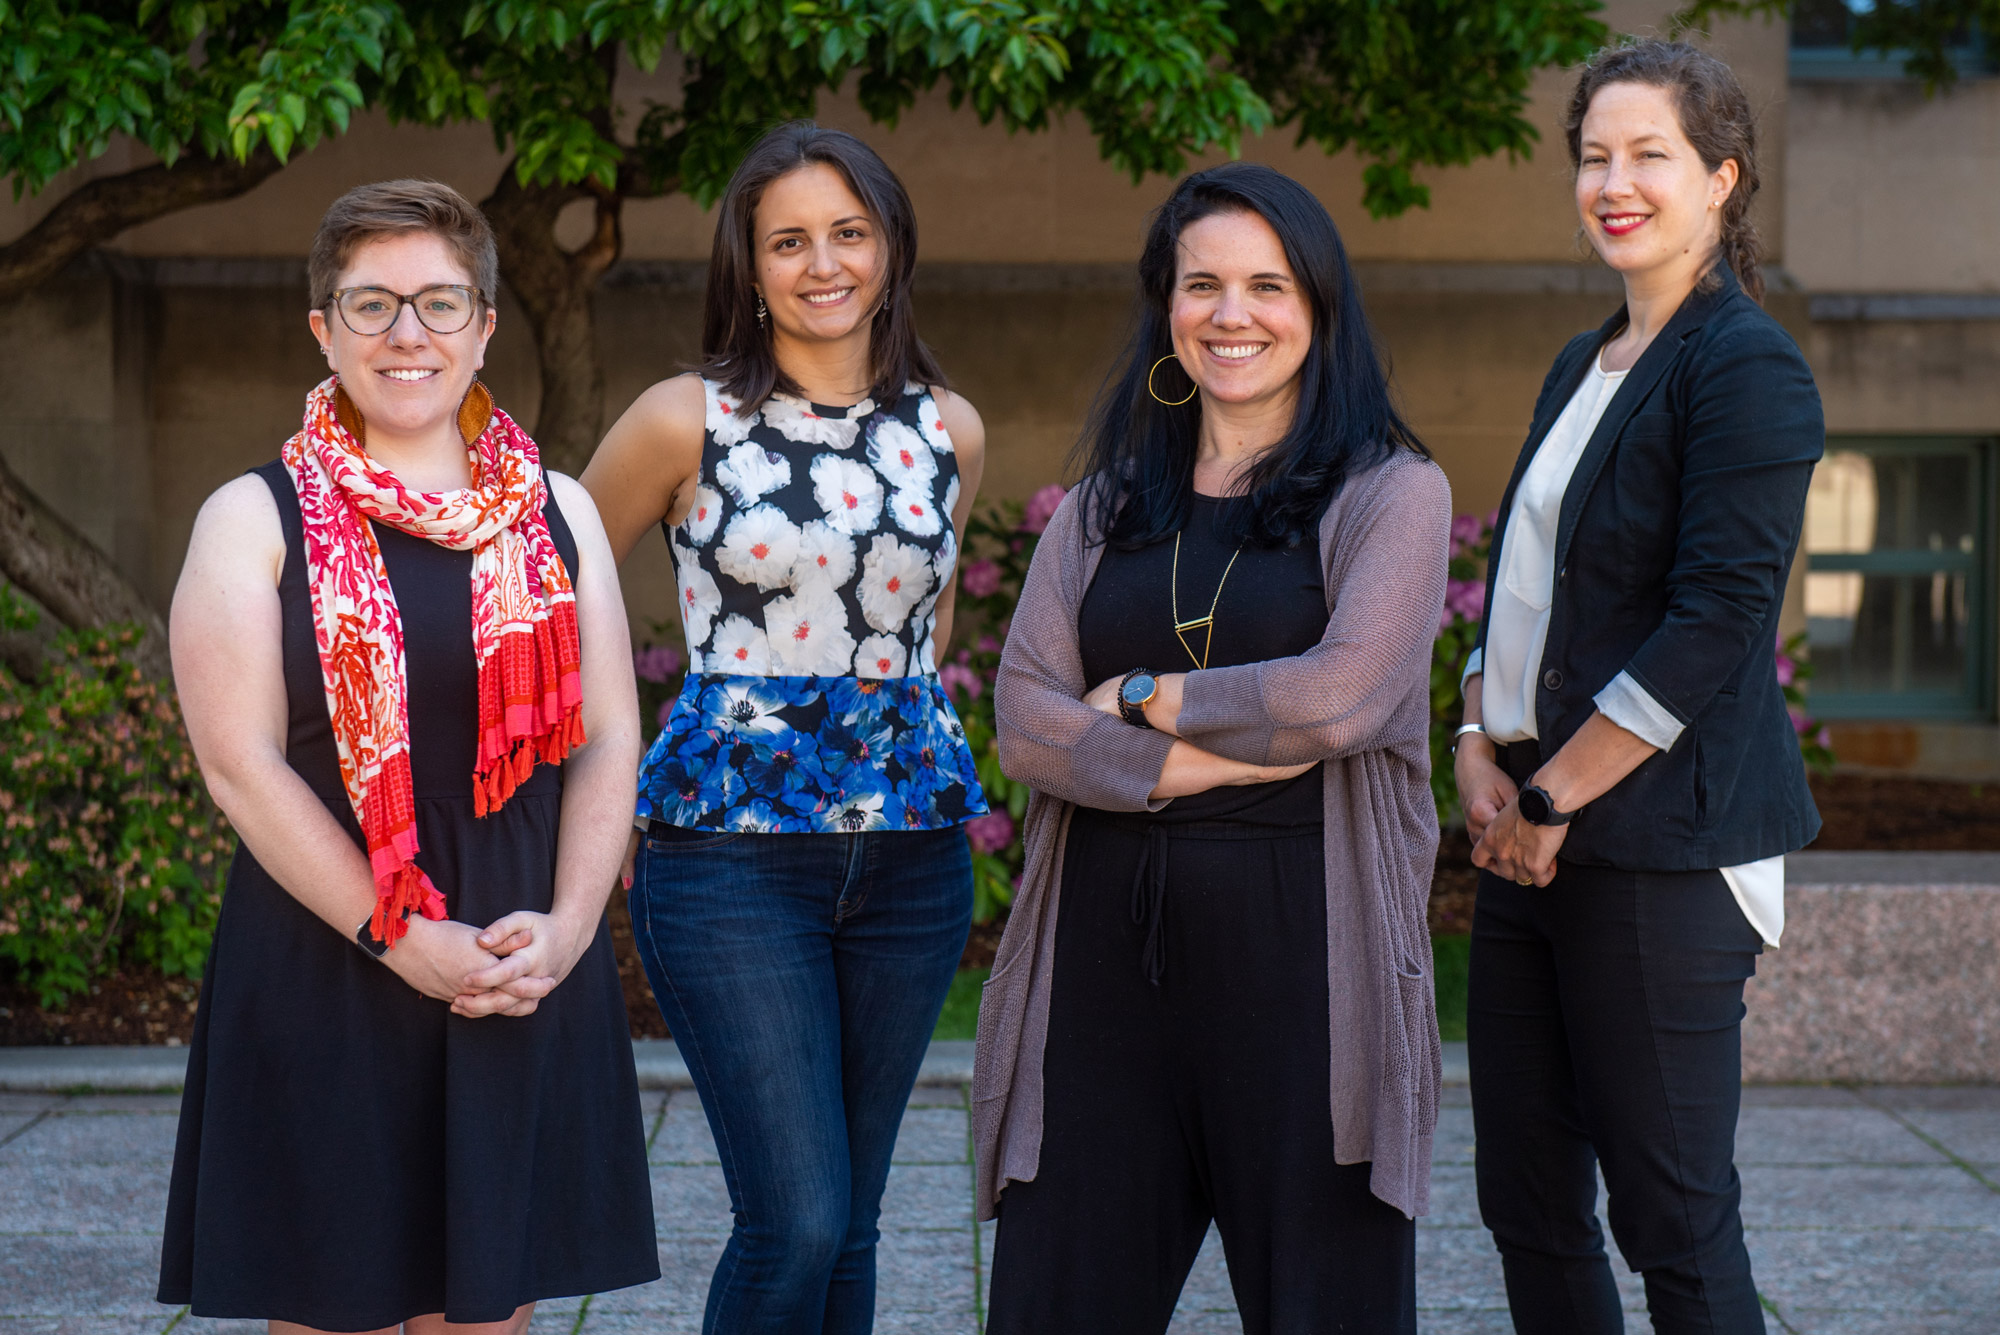 BU scientists Colleen Bove (from left), Hanny Rivera, Sarah Davies, and Wally Fulweiler join other collaborators in a new PLOS Biology piece arguing that career advancement in science needs to reward an expanded set of criteria—beyond citations and publishing record—including mentorship, science communication, and multicultural experience.